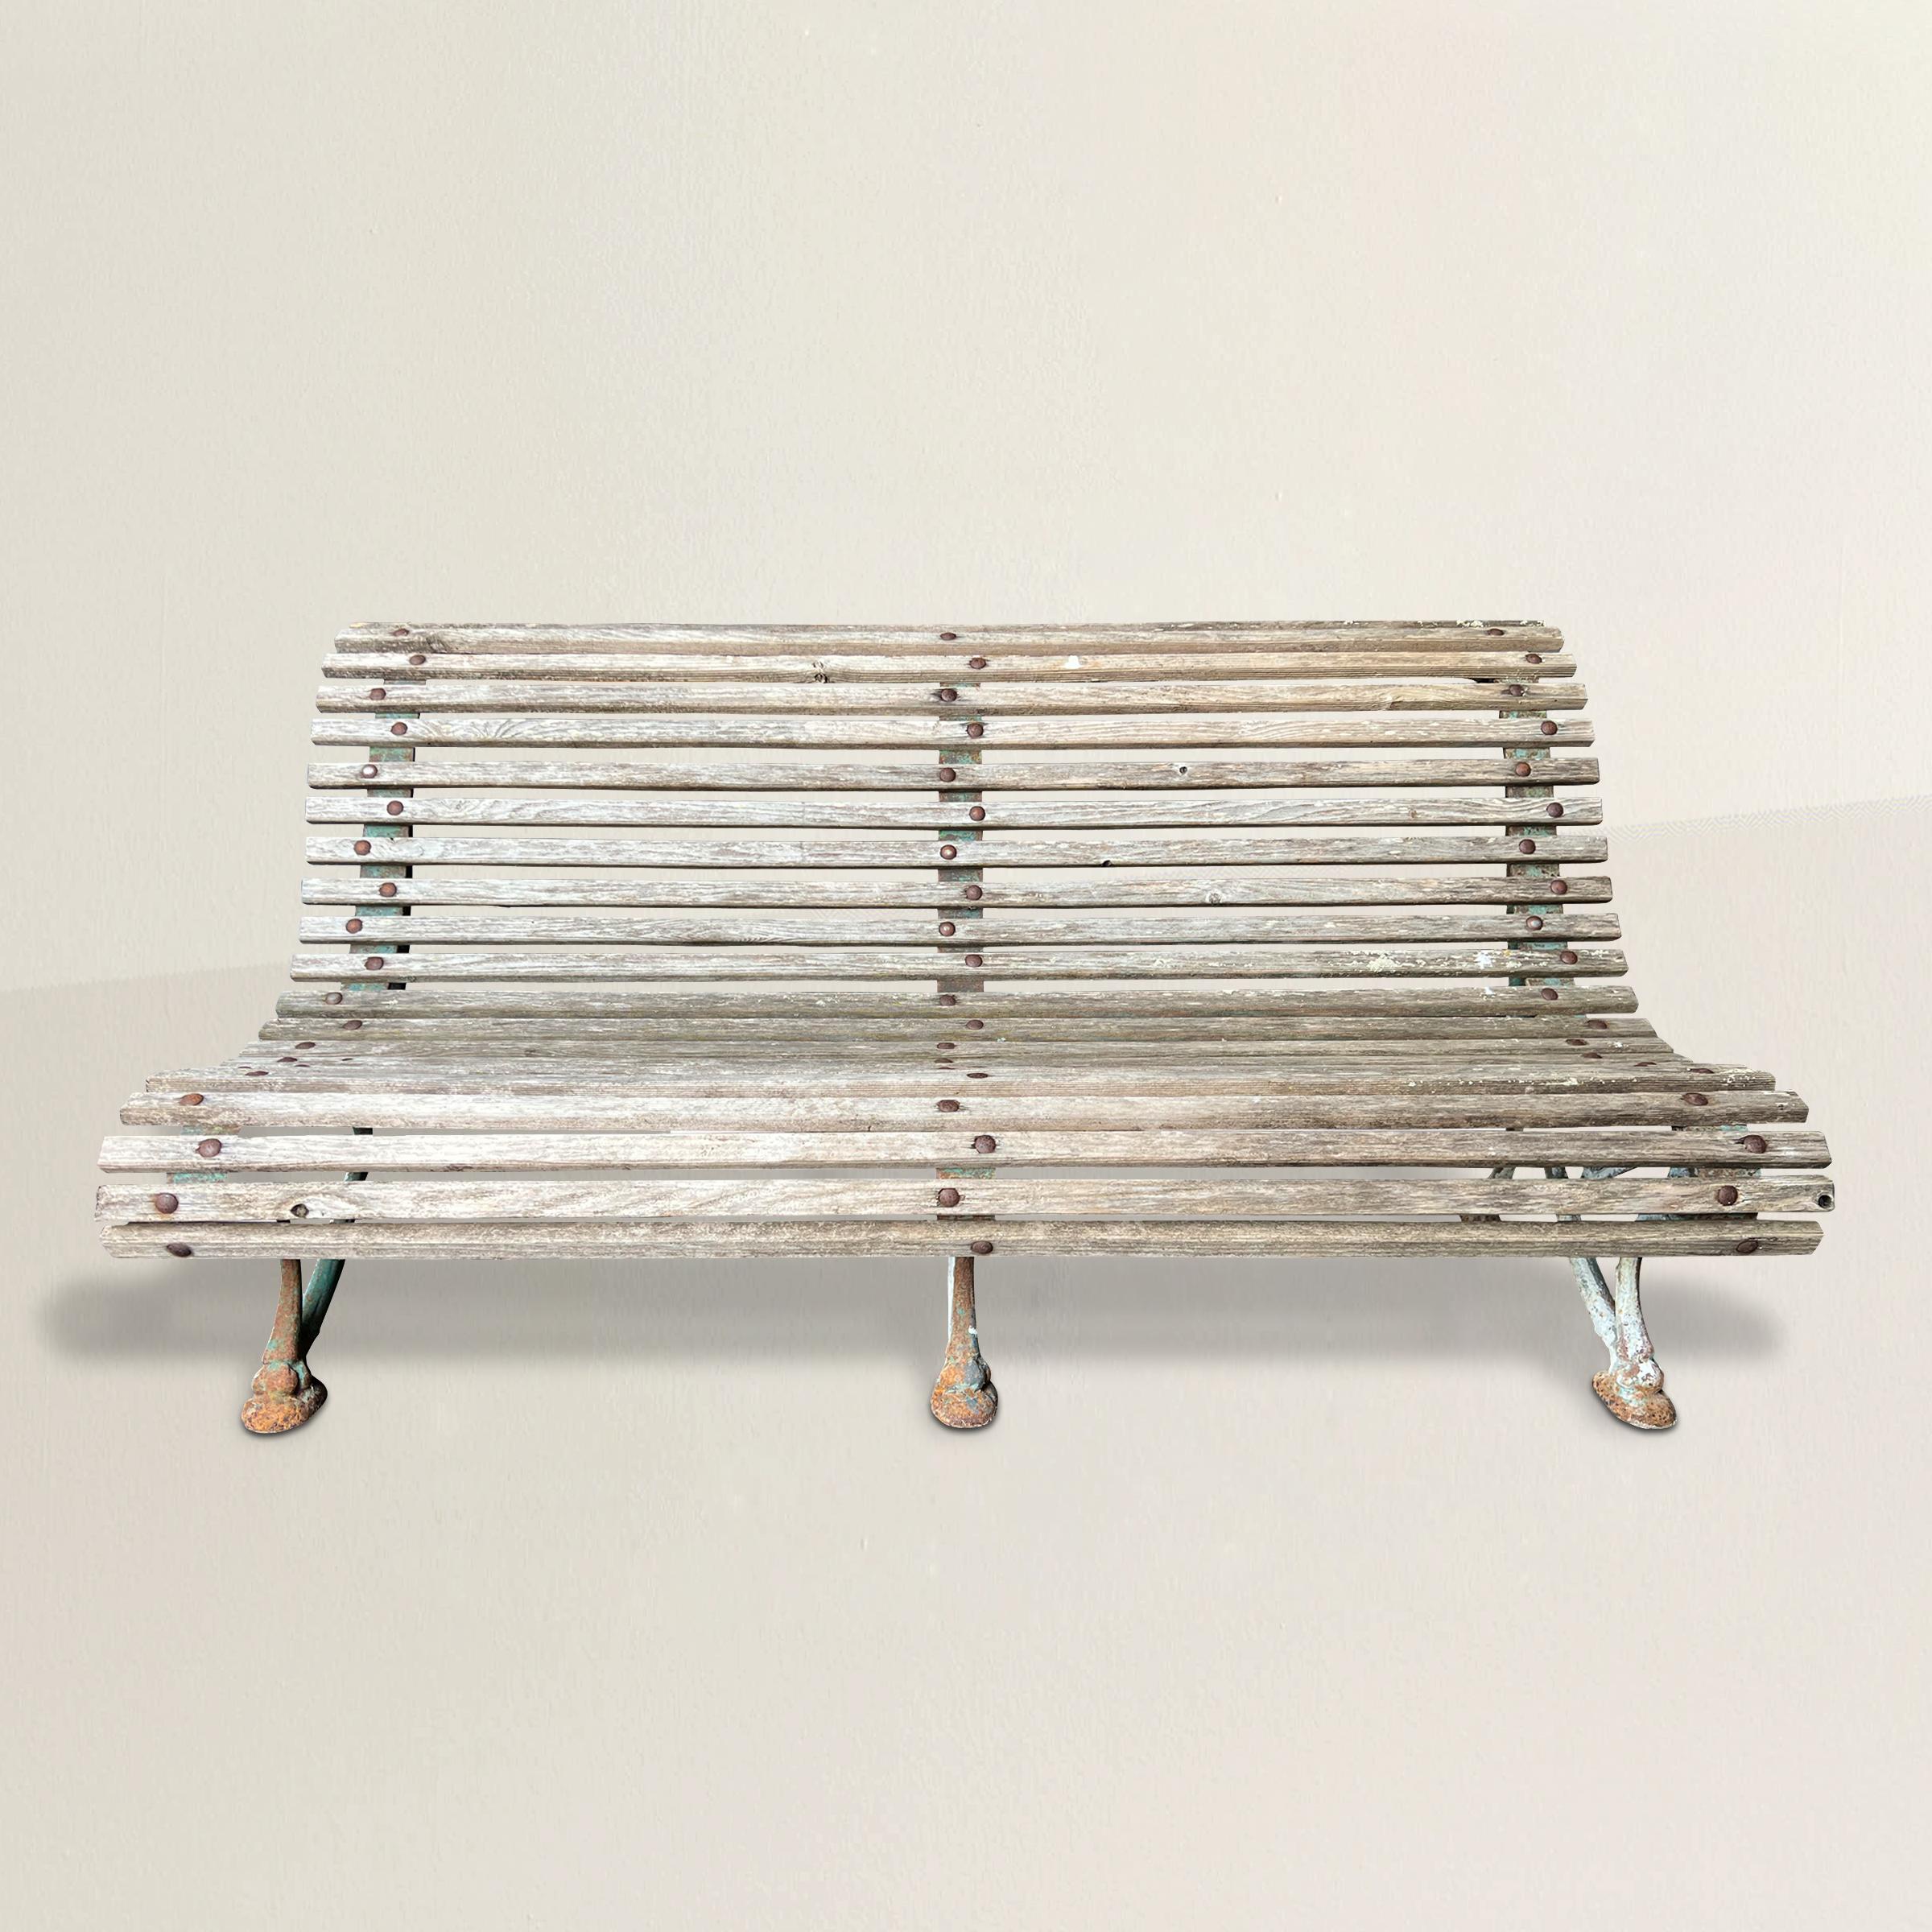 A spirited and playful late 19th century French cast iron garden bench with three scrolled legs and two dozen wood slats. The perfect perch to watch the flowers grow.